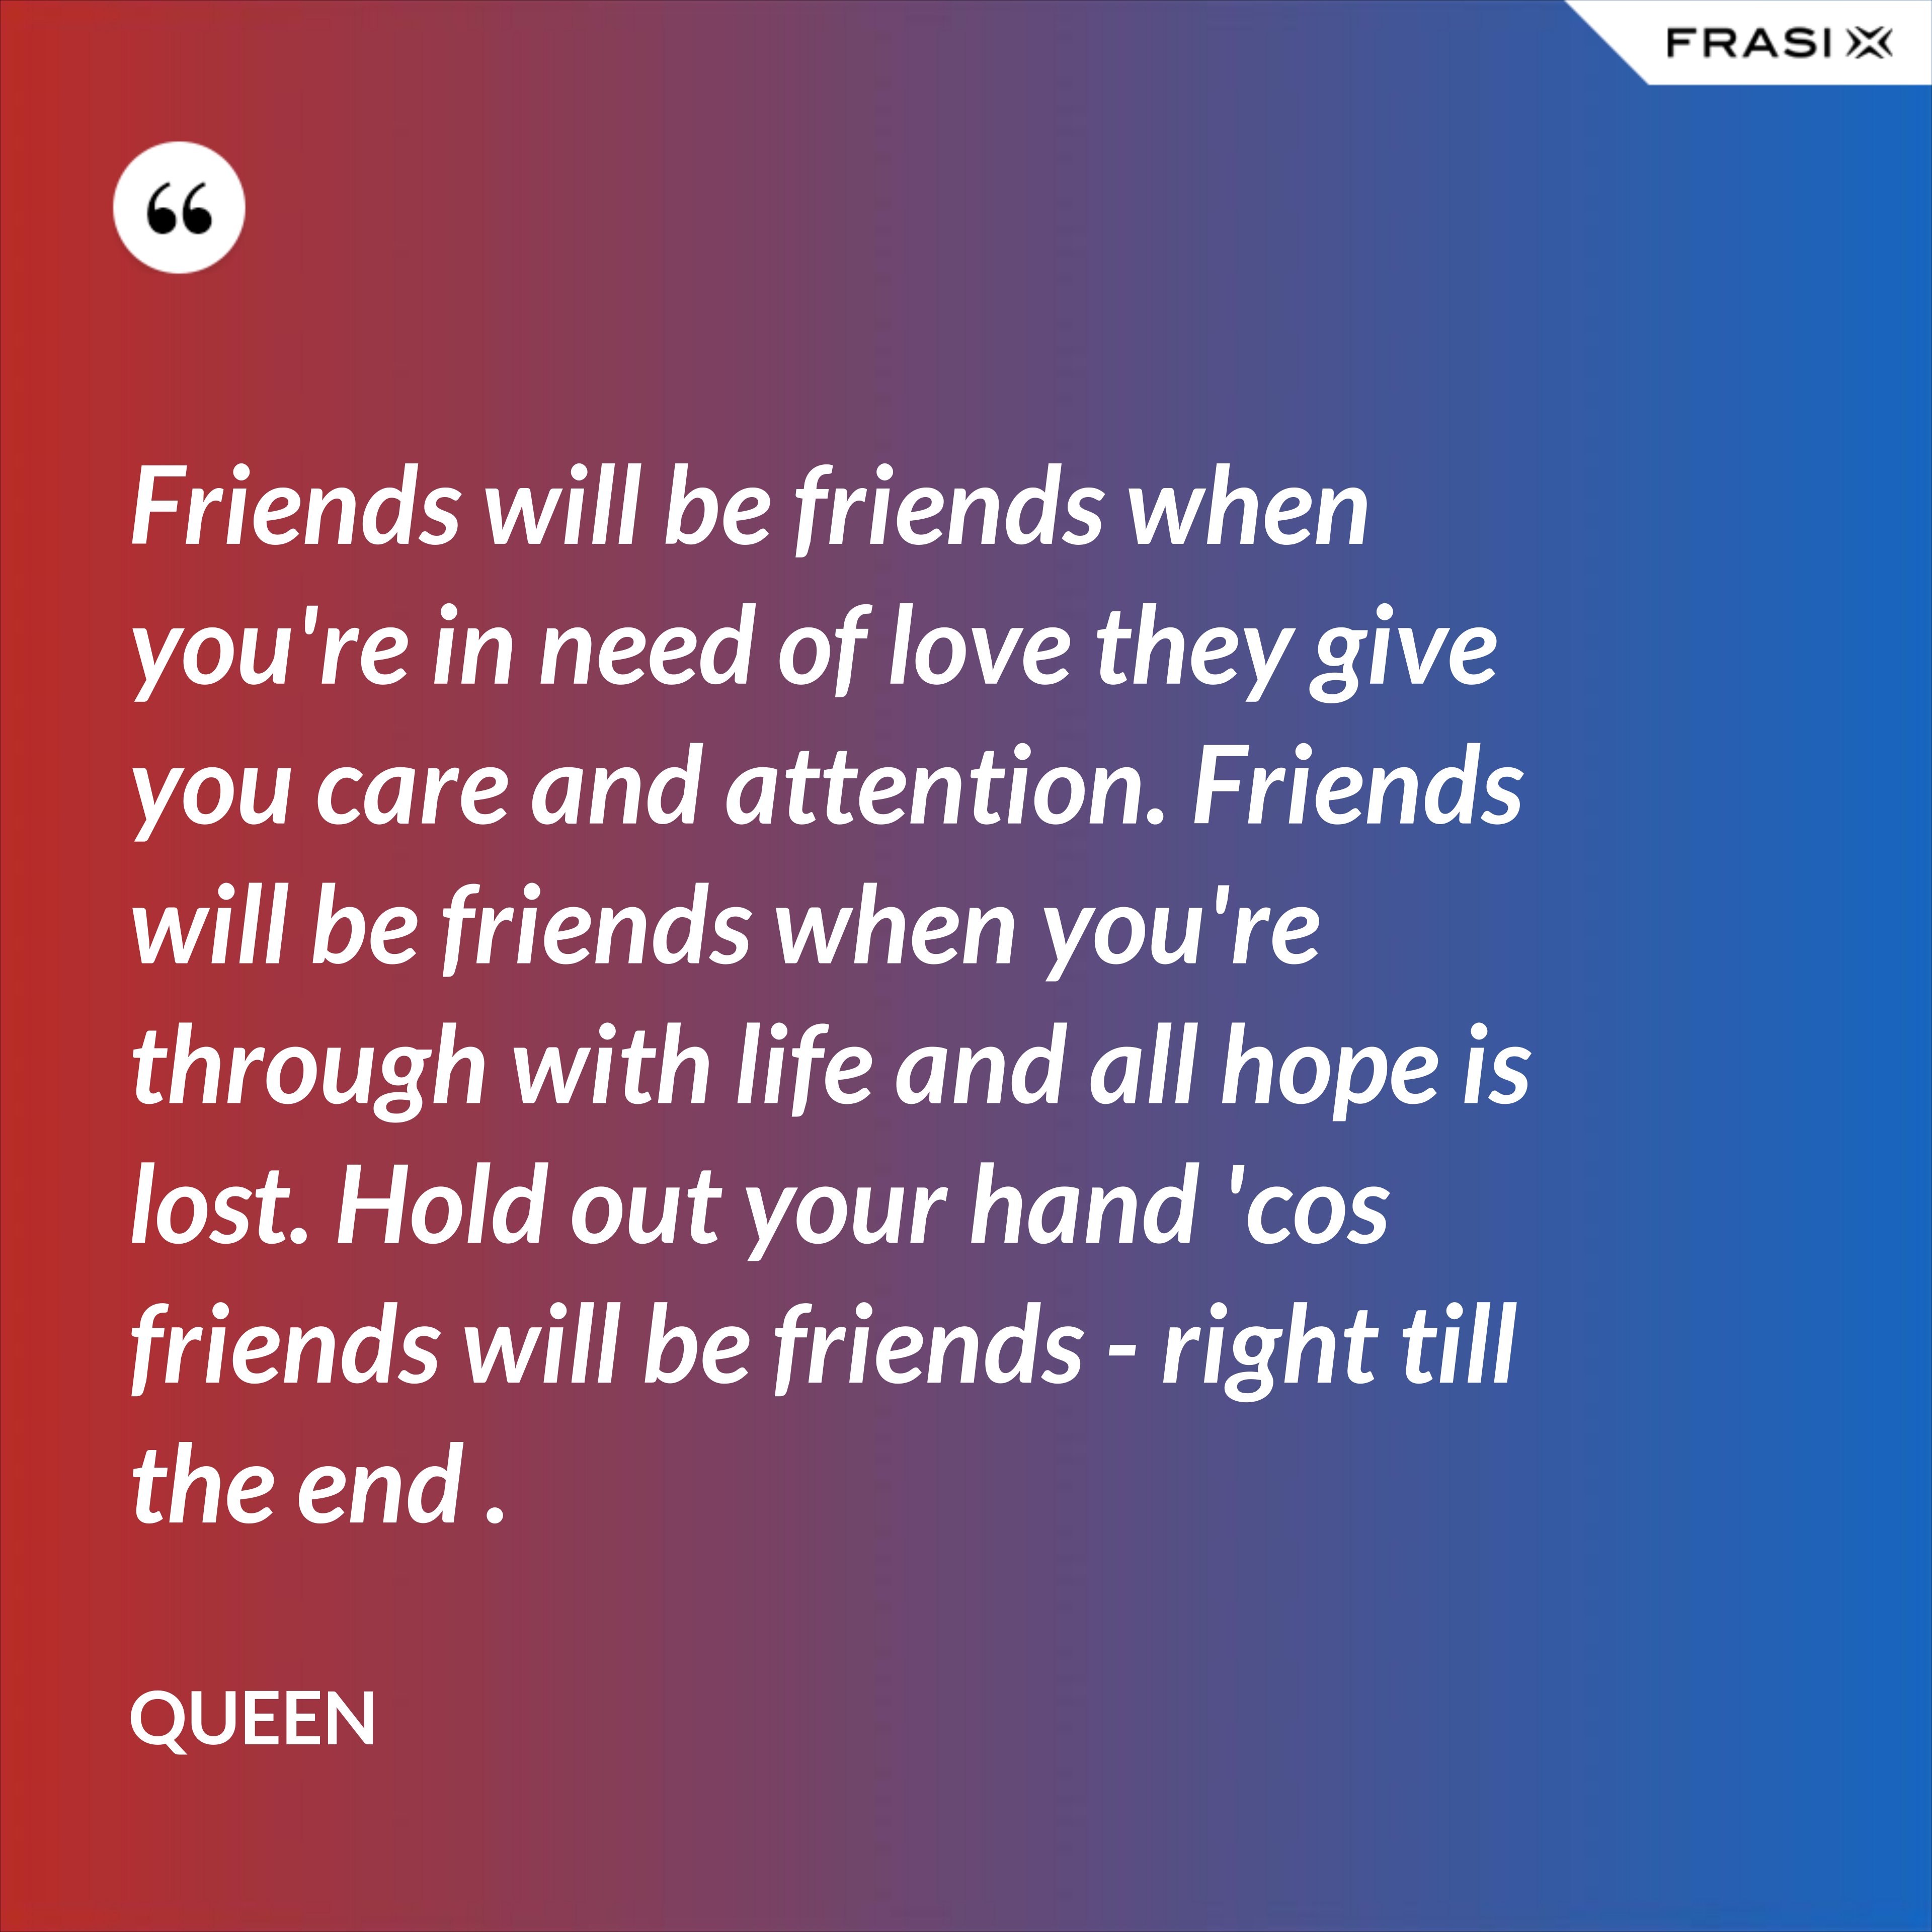 Friends will be friends when you're in need of love they give you care and attention. Friends will be friends when you're through with life and all hope is lost. Hold out your hand 'cos friends will be friends - right till the end . - Queen